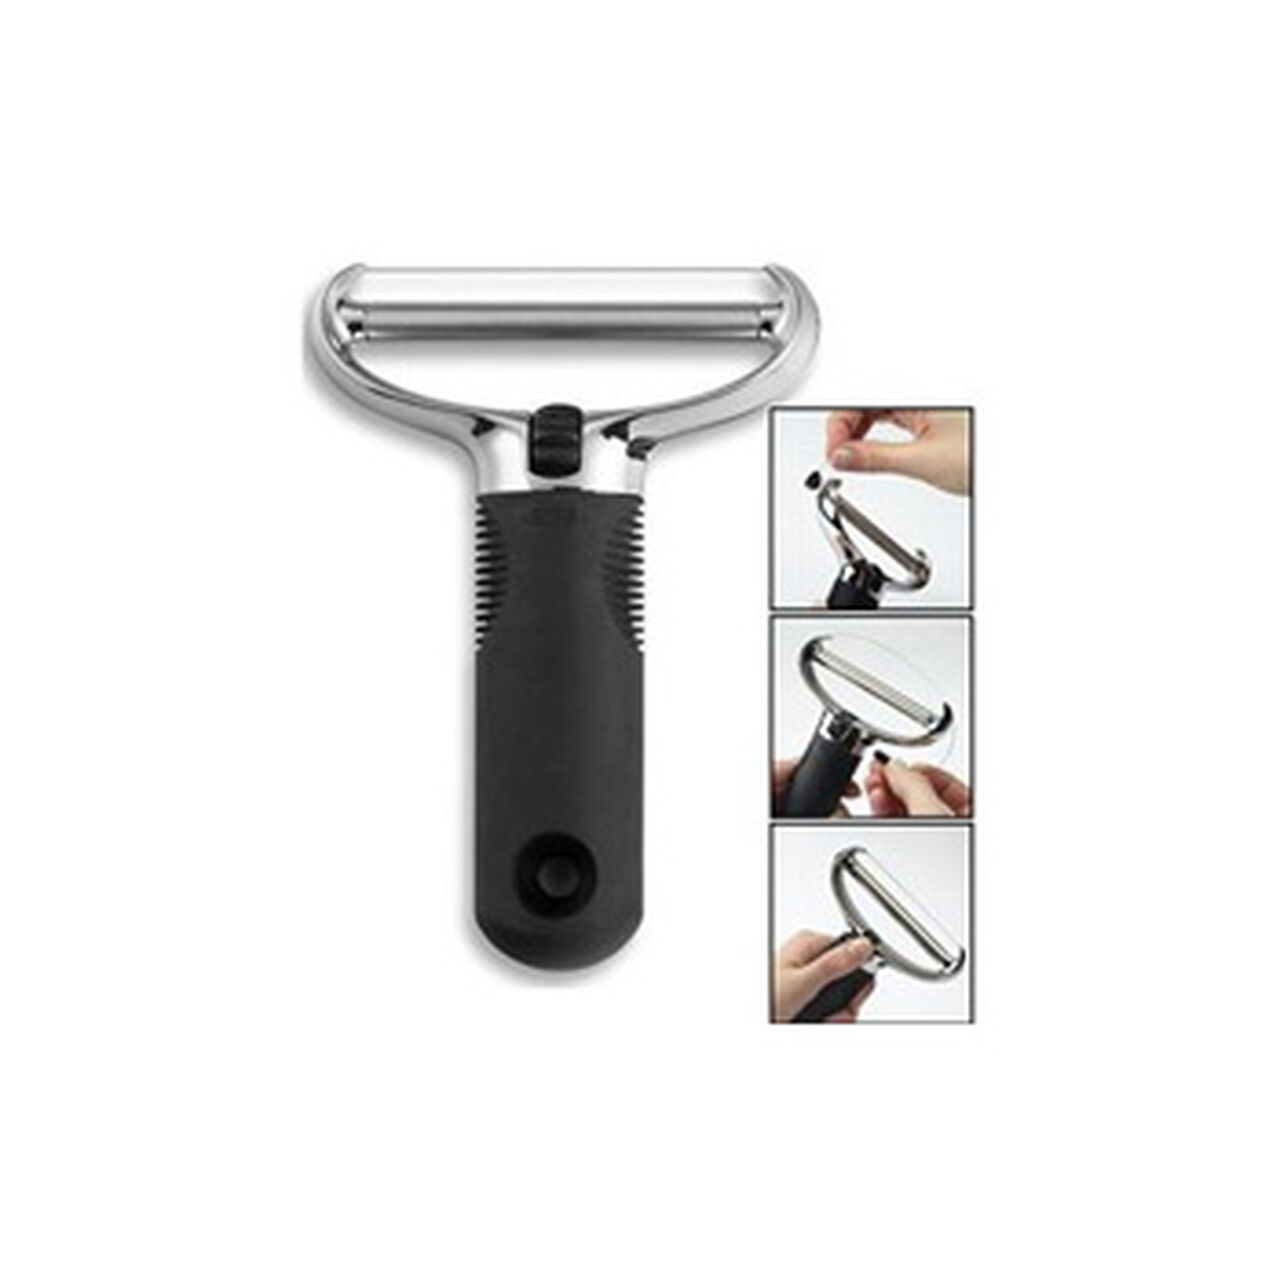  OXO Good Grips Cheese Slicer with Replaceable Wires